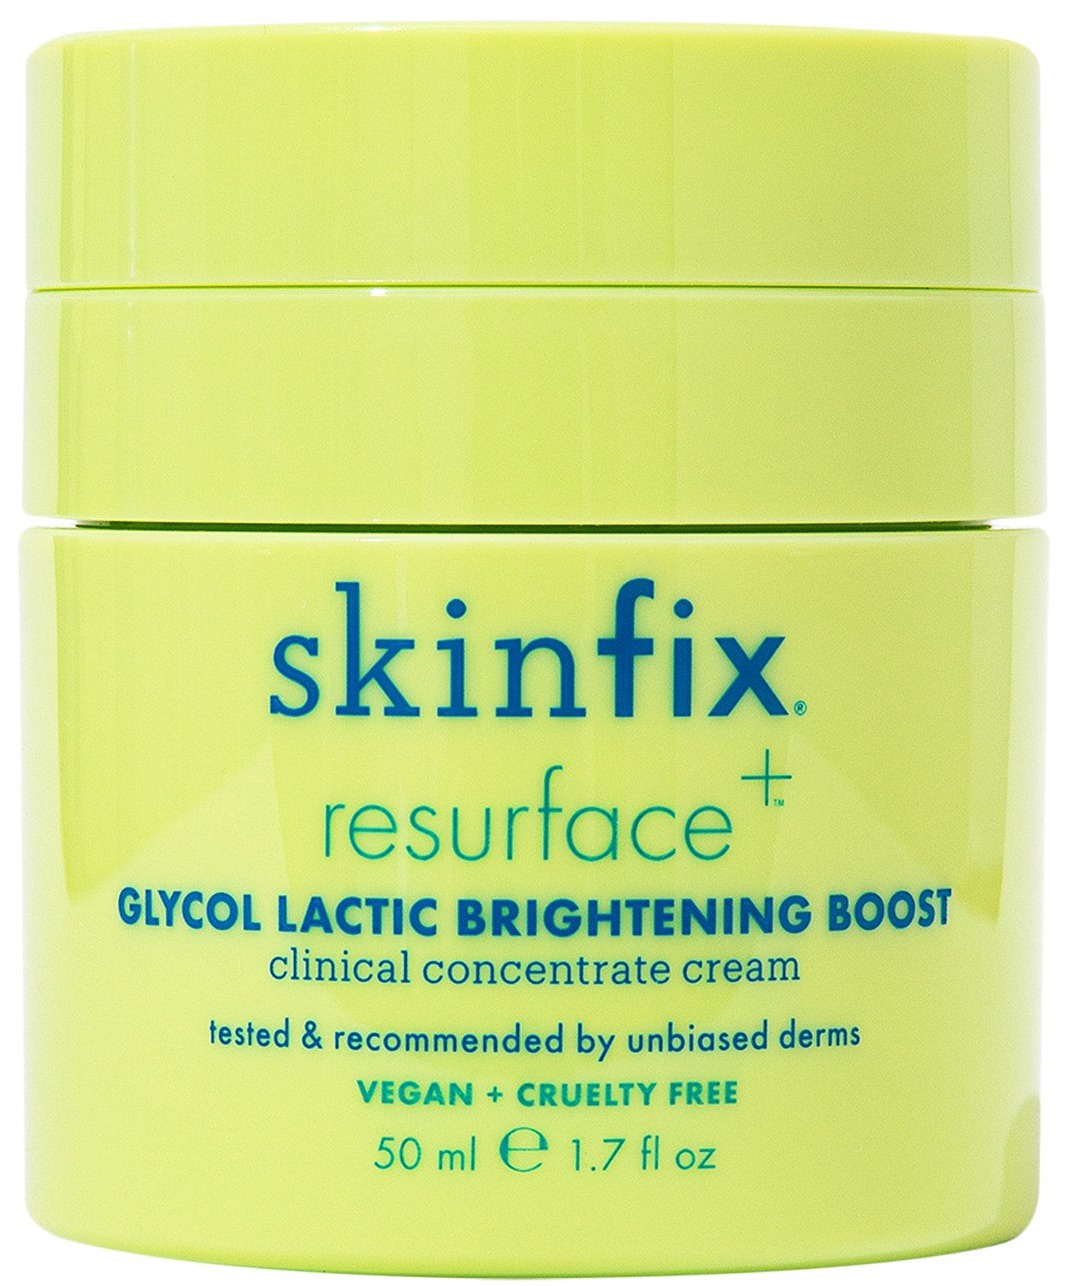 Skinfix Resurface+ Glycol Lactic Brightening Boost